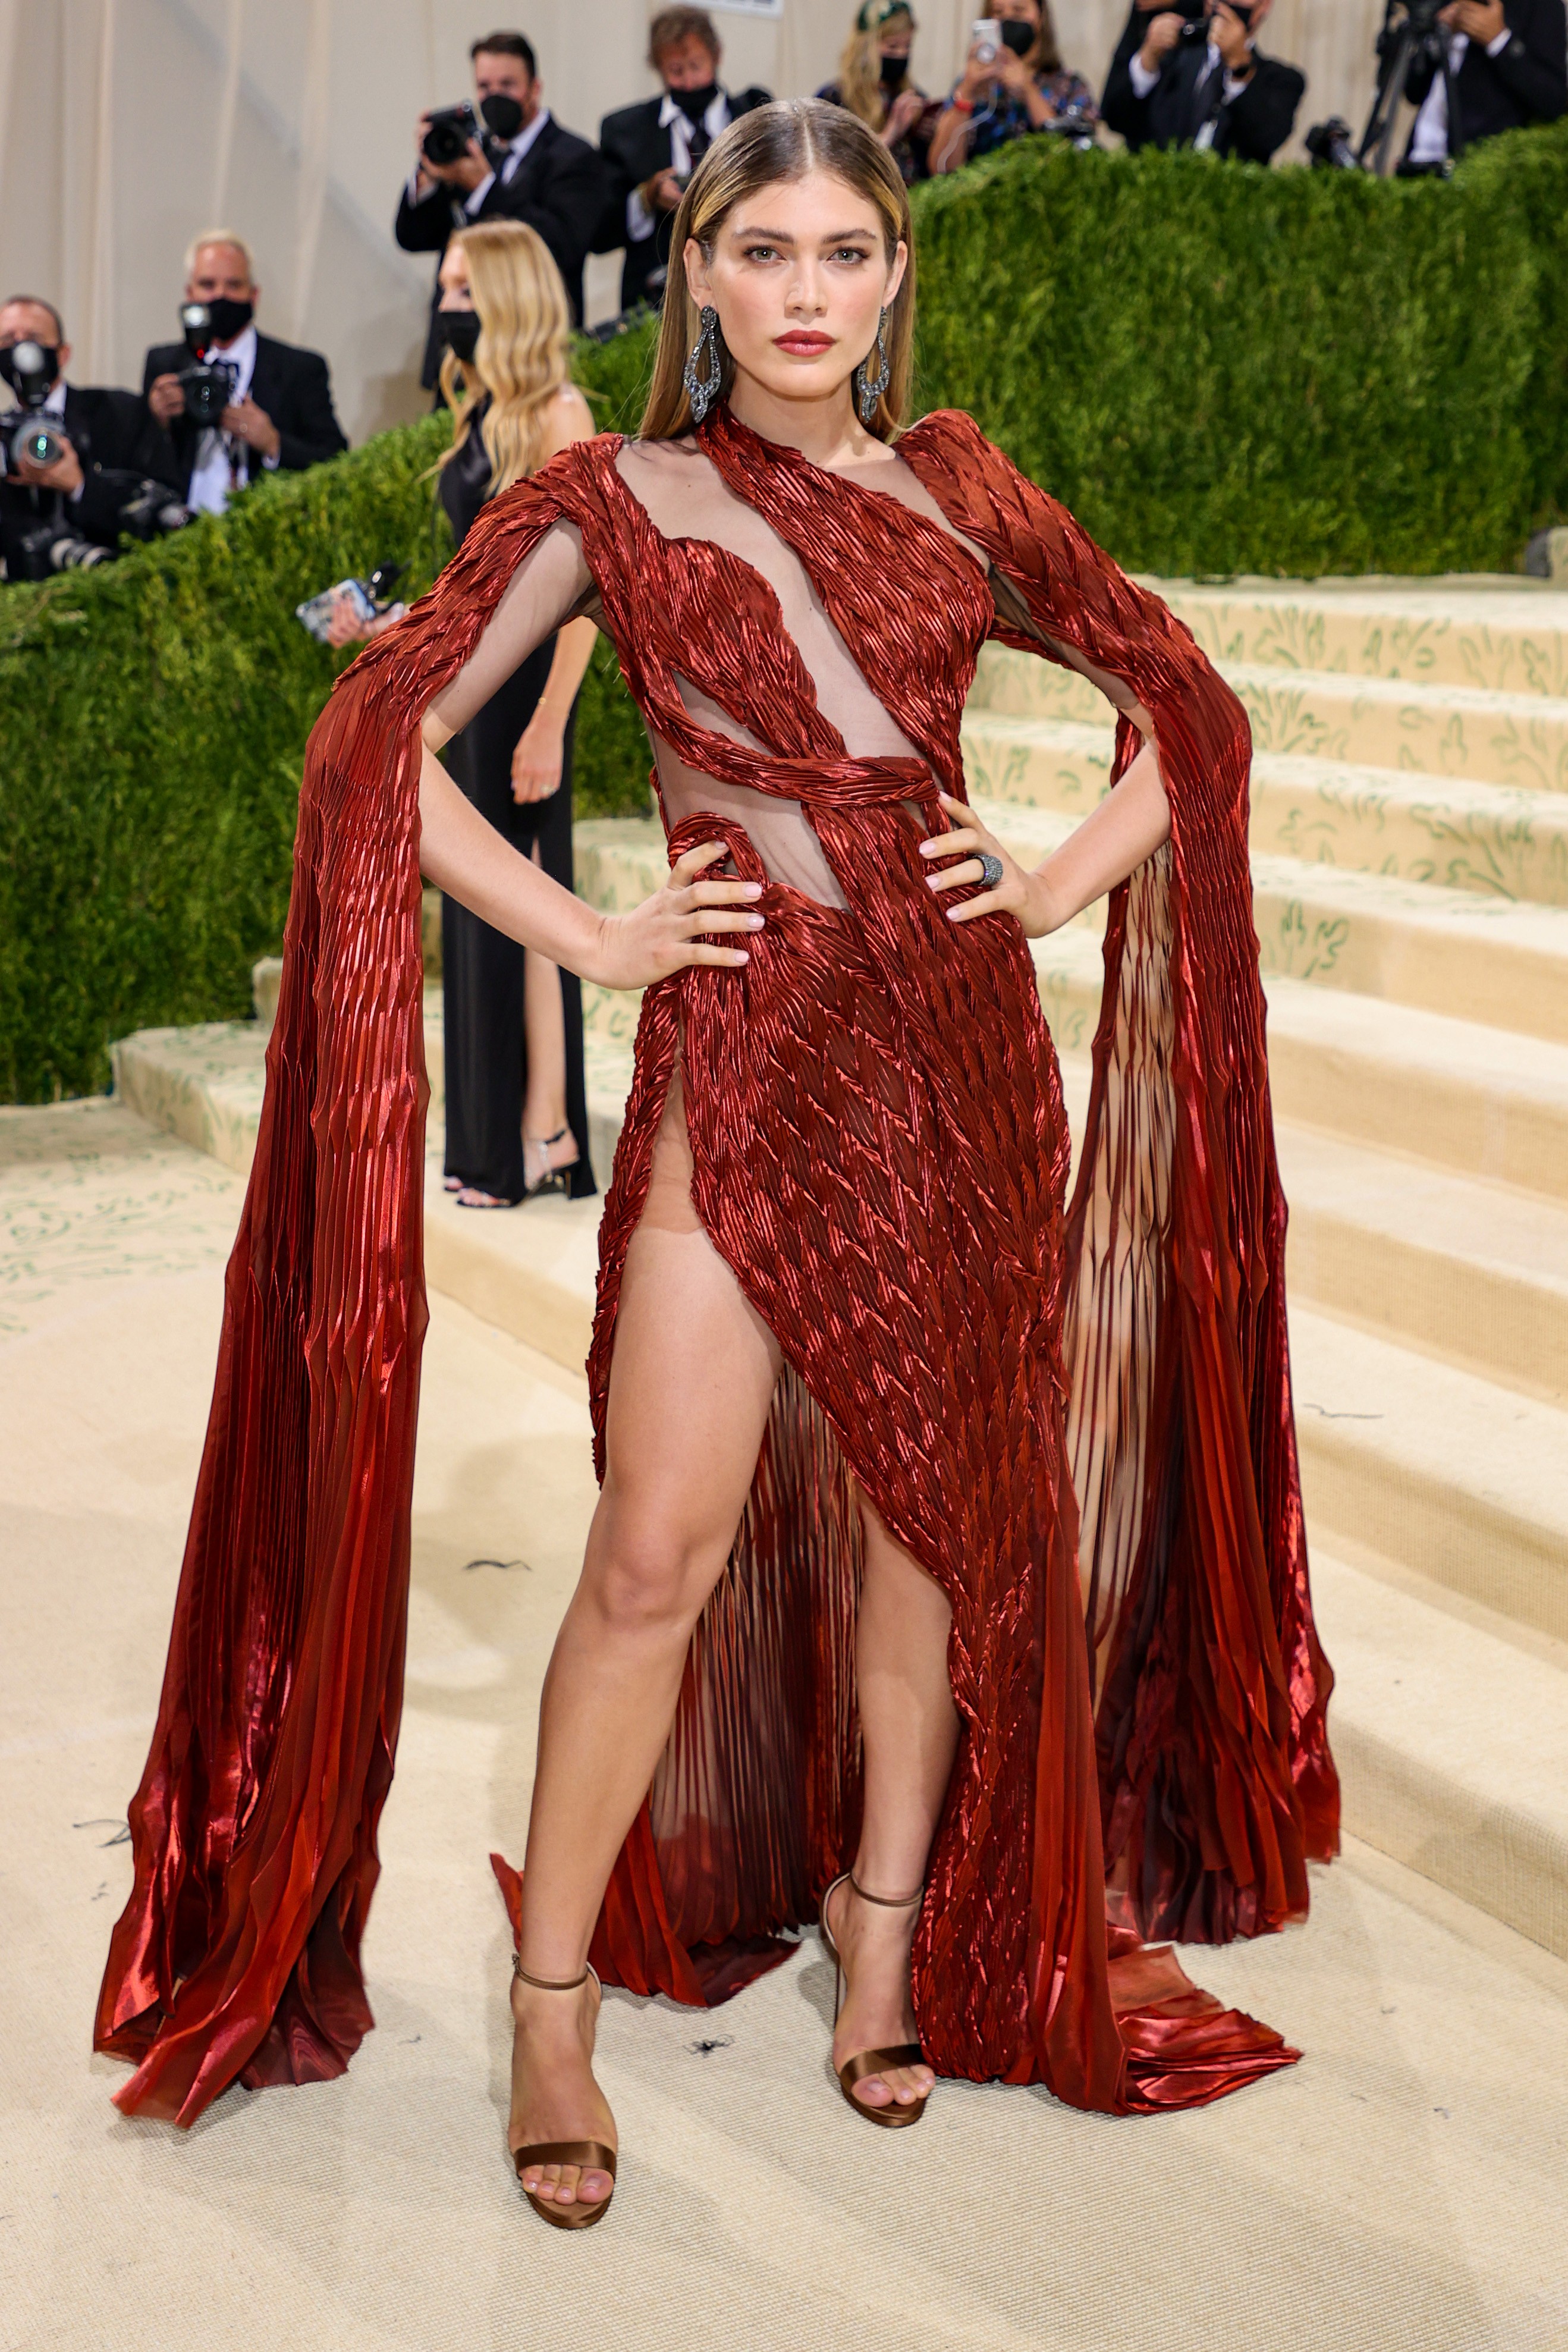 NEW YORK, NEW YORK - SEPTEMBER 13: Valentina Sampaio attends The 2021 Met Gala Celebrating In America: A Lexicon Of Fashion at Metropolitan Museum of Art on September 13, 2021 in New York City. (Photo by Theo Wargo/Getty Images) (Foto: Getty Images)